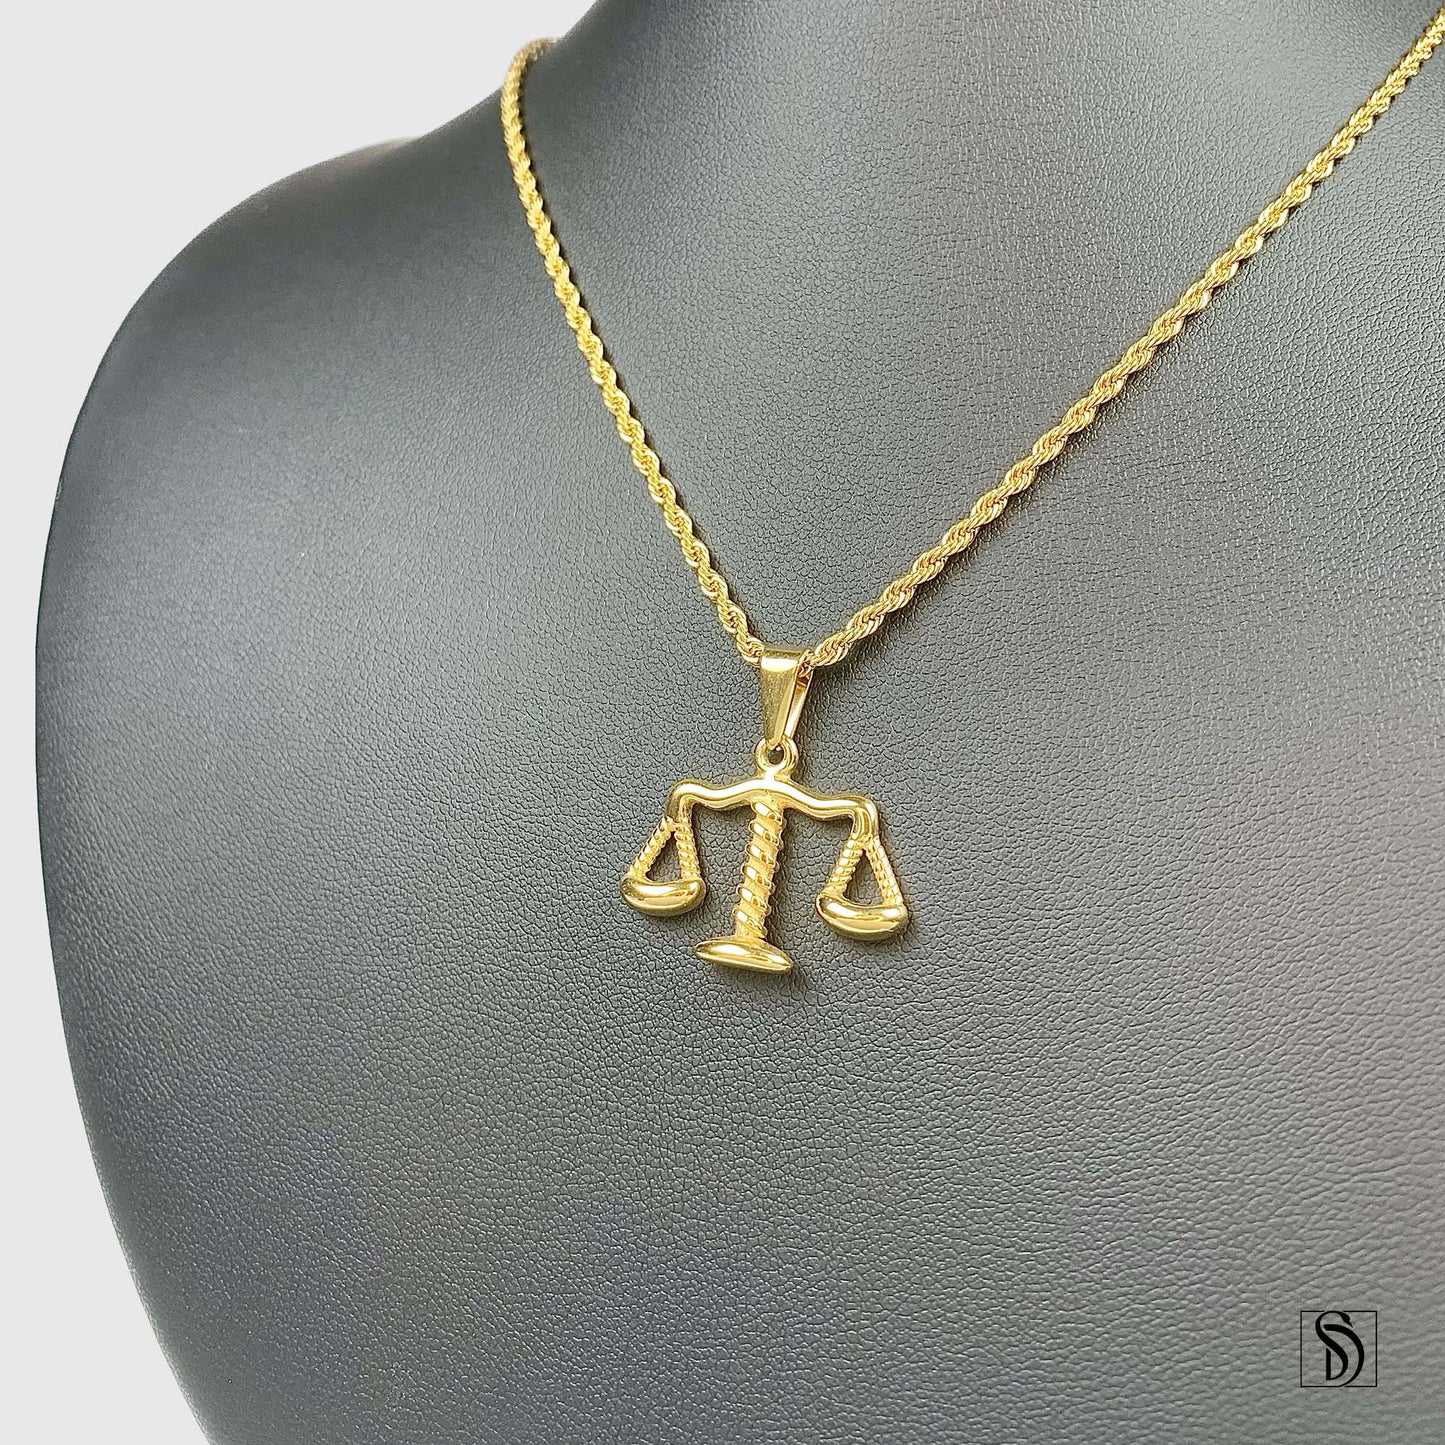 Gold Law Of Balance Justice Pendant Necklace